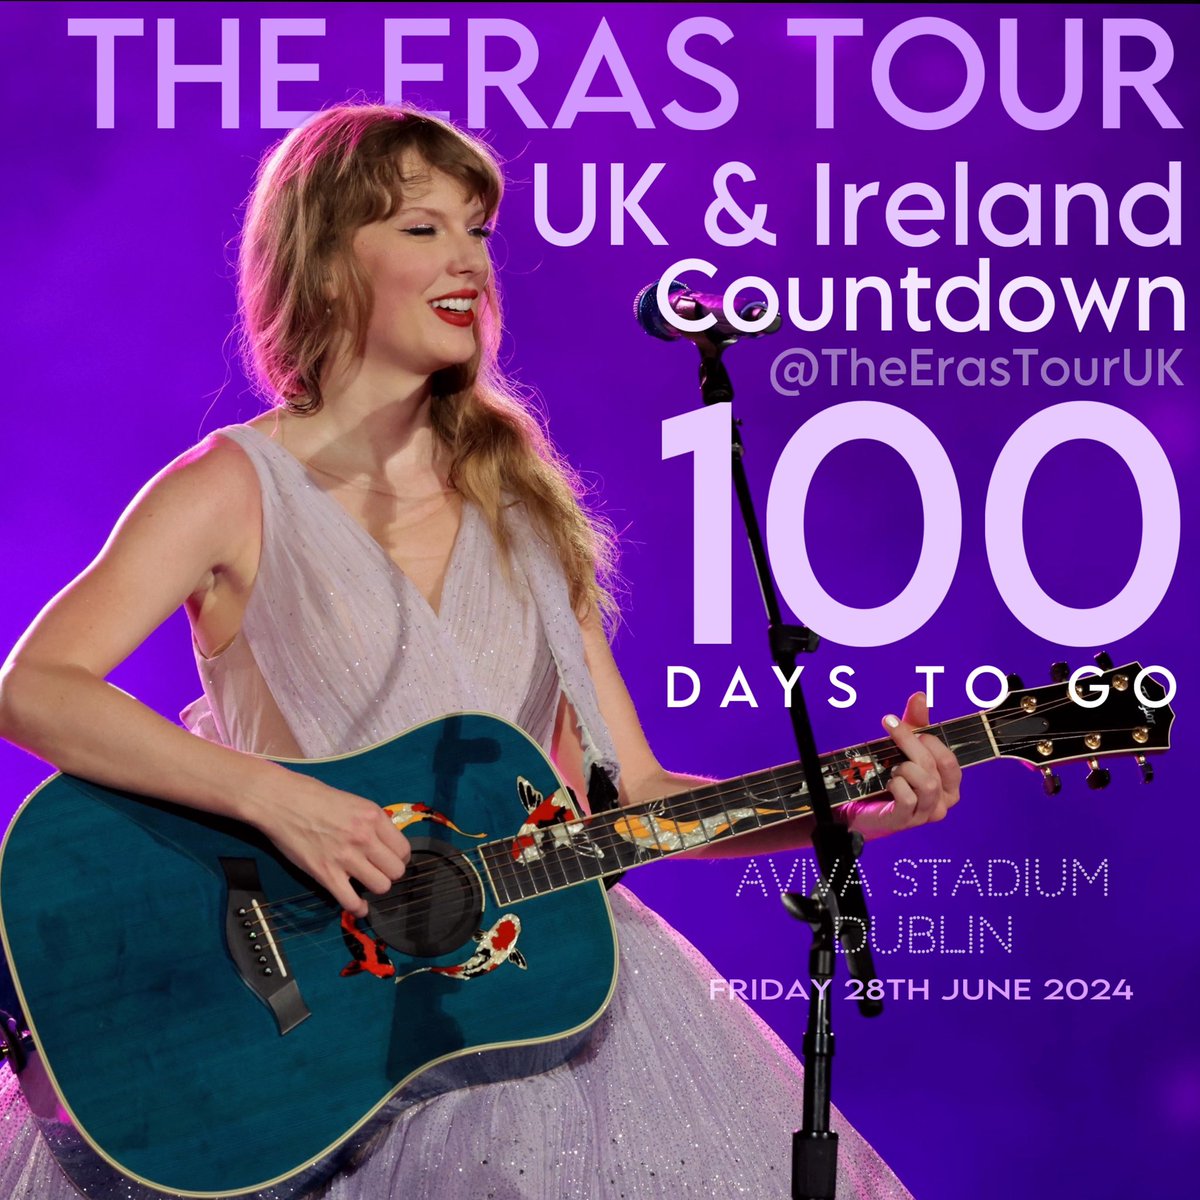 📆 In 100 days Taylor Swift will be returning to Ireland for the Eras Tour shows at Aviva Stadium, Dublin! Who’s looking forward to seeing @TaylorSwift13 at the shows in Dublin?